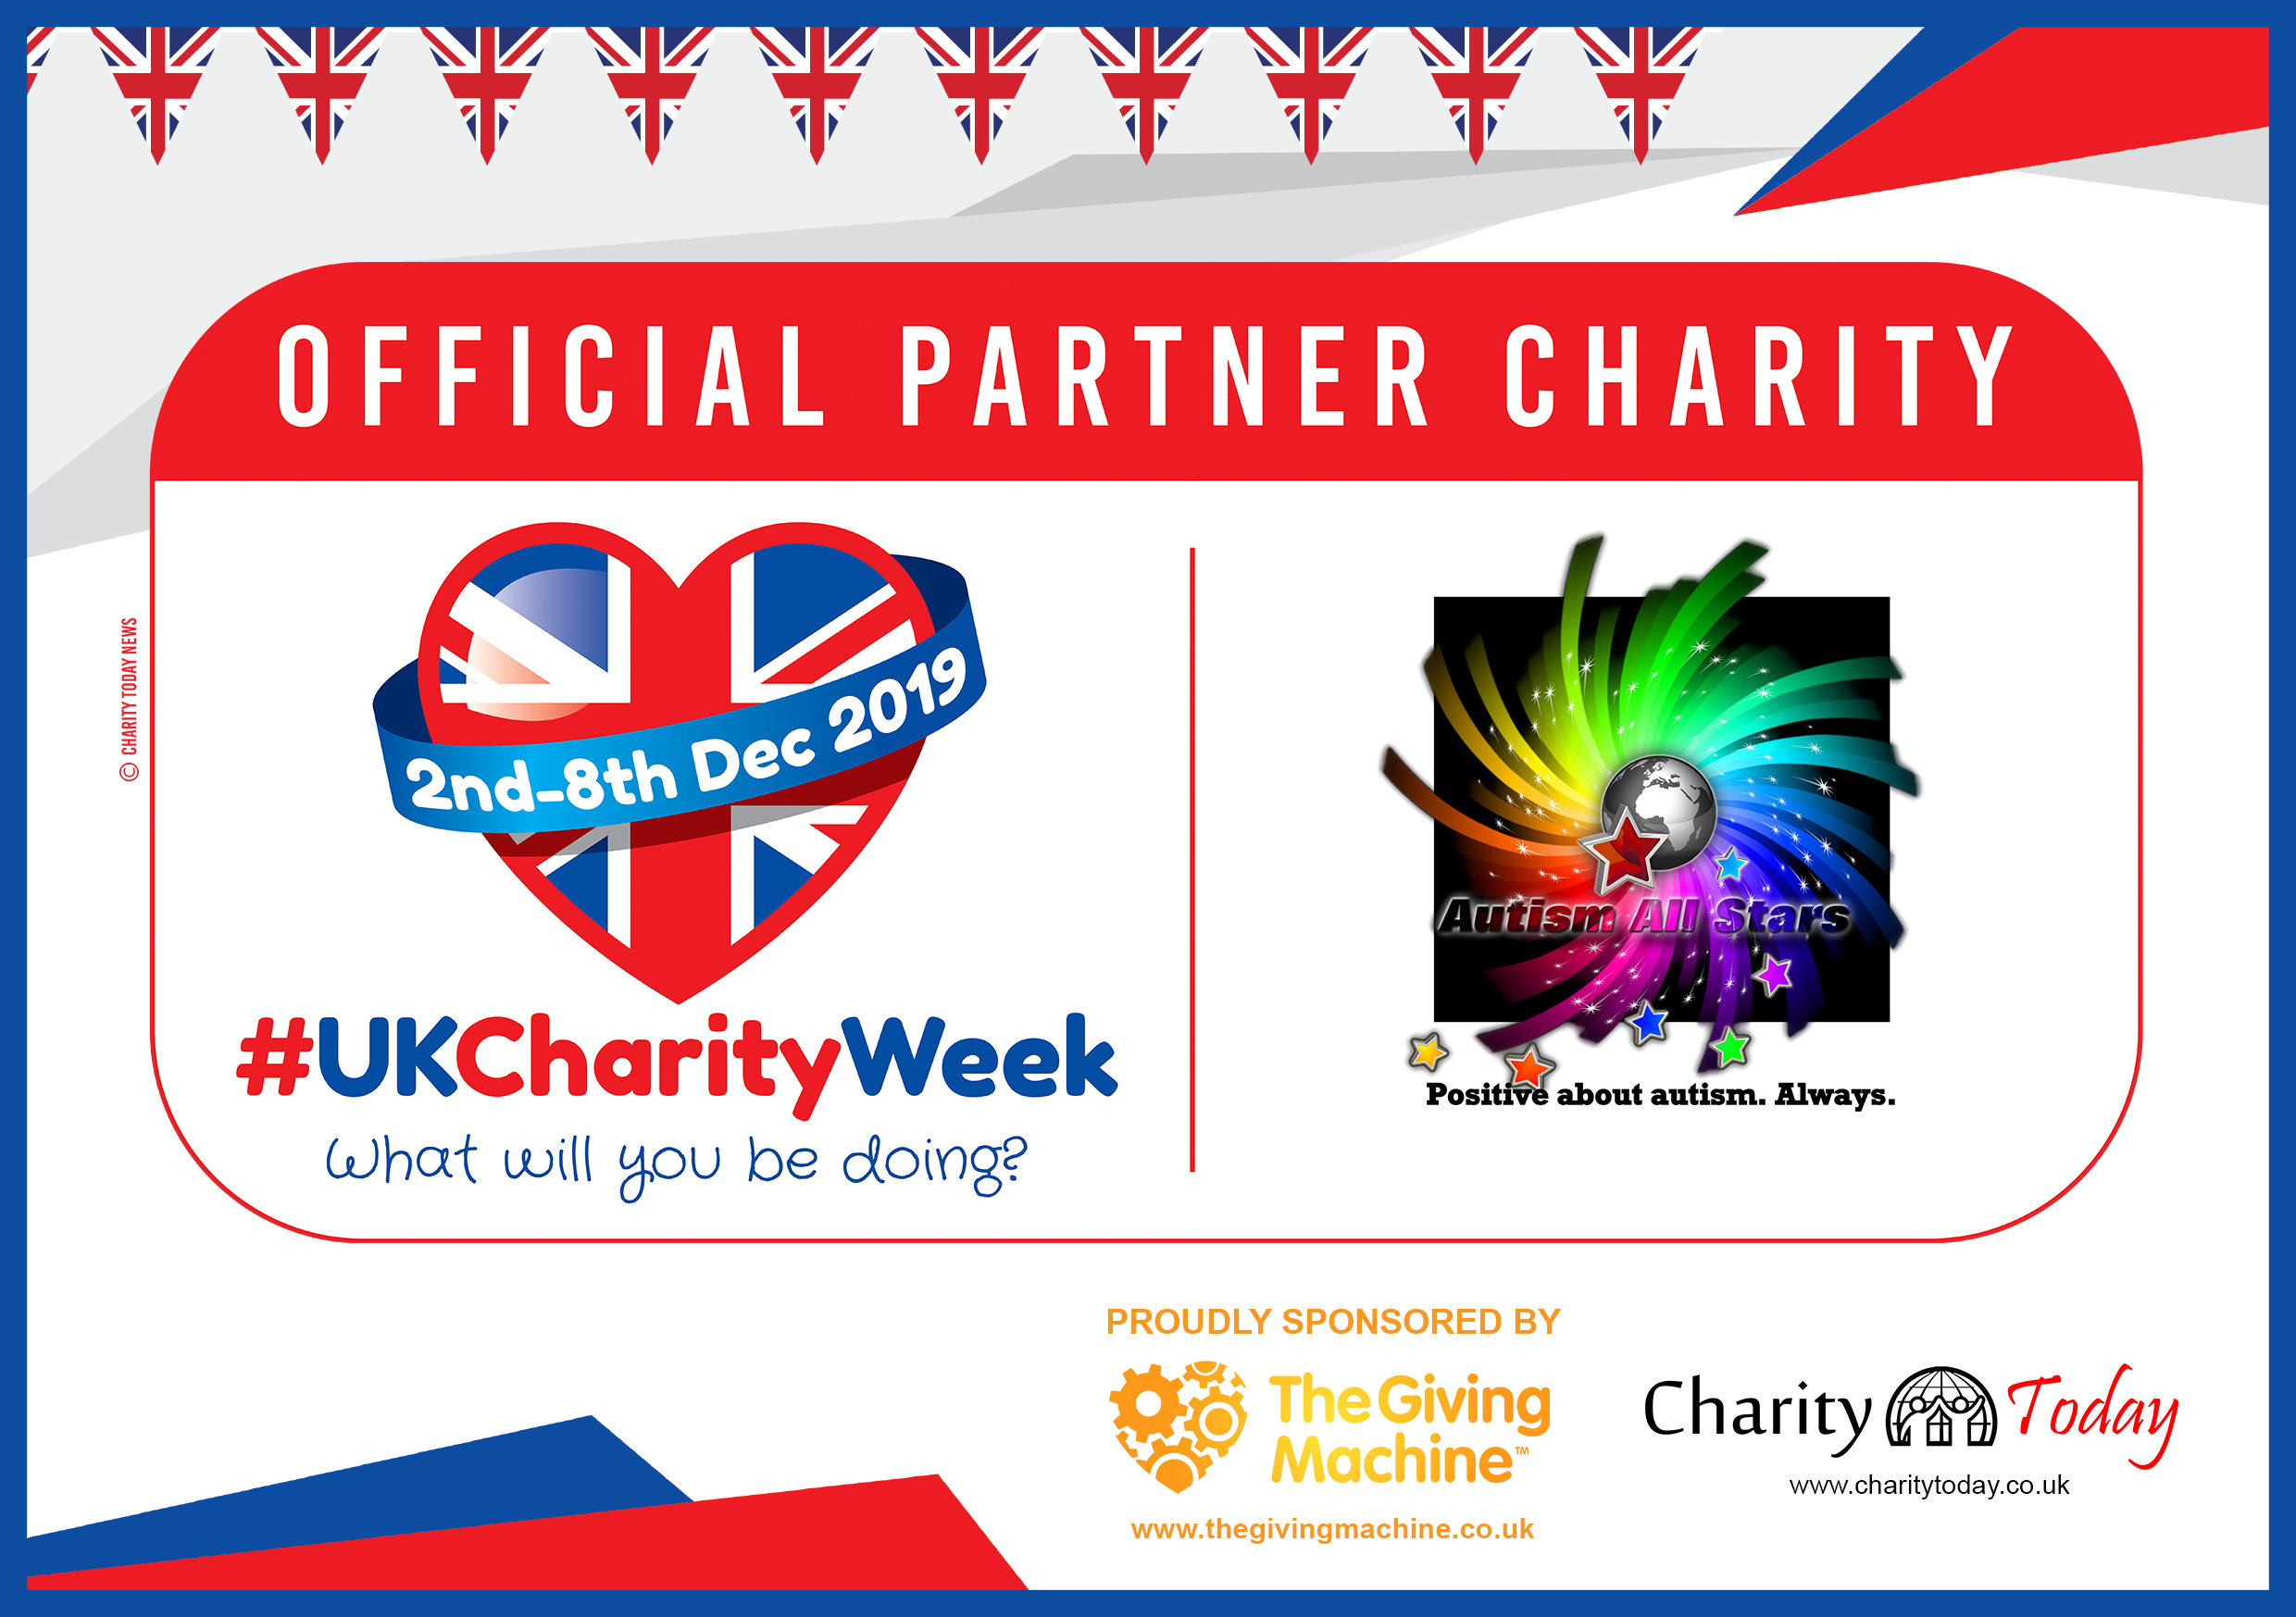 Aspergers, autism, Autism All Stars, autism awareness, UK Charity Week, fundraising, charity, neurodiversity, Surrey, Sussex, UK Charity Week, autism acceptance, actually autistic, donate, fundraise, teamwork, support autism, 